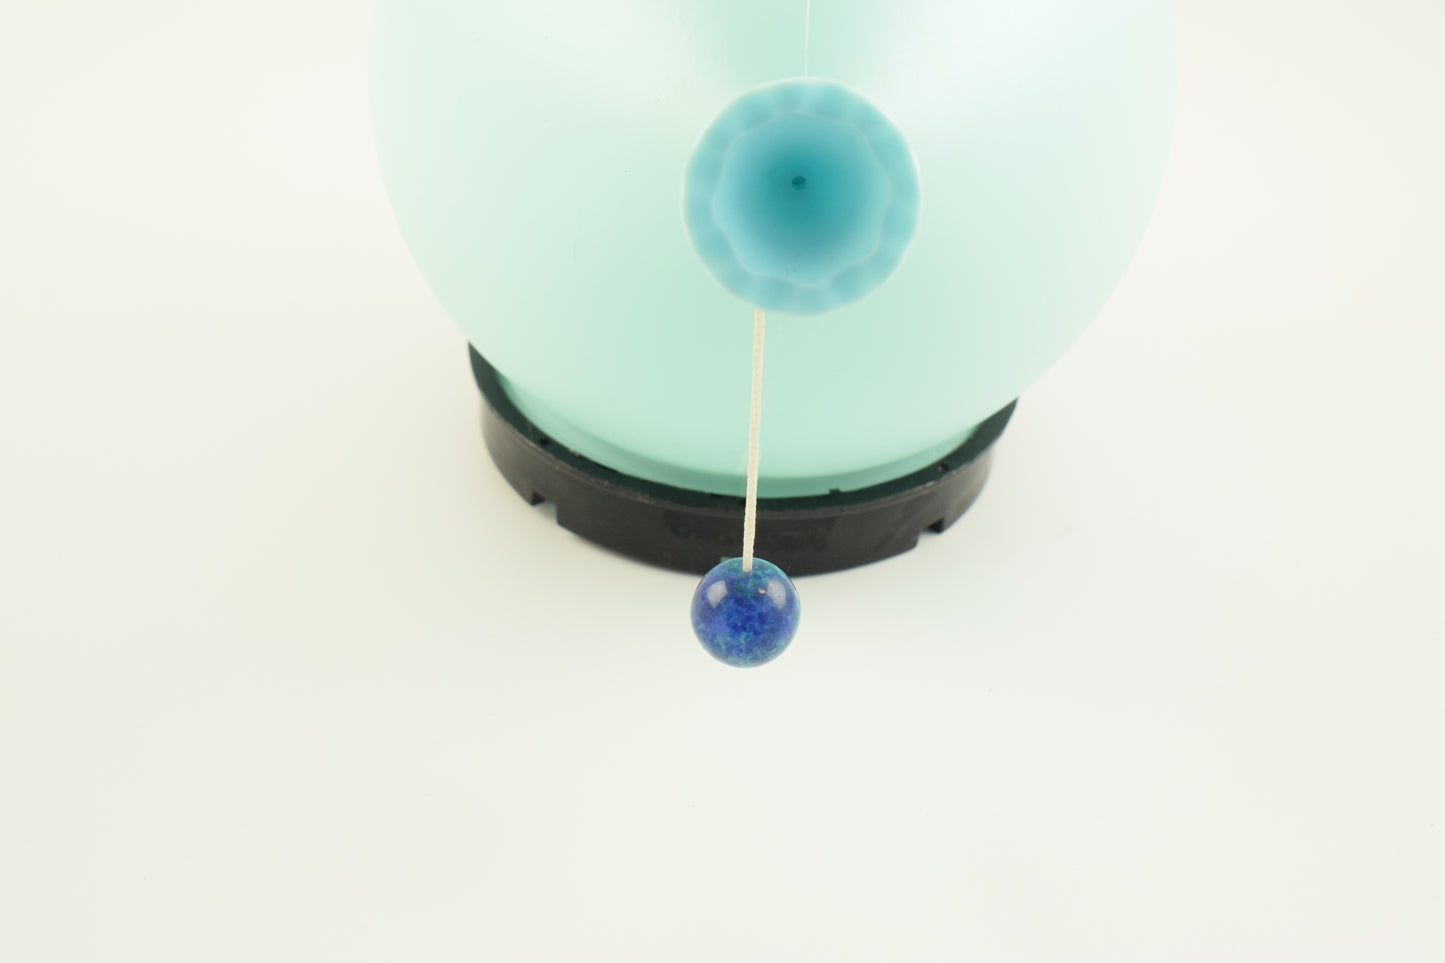 Table or wall balloon lamp designed by Yves Christin for bilumen, smallest version